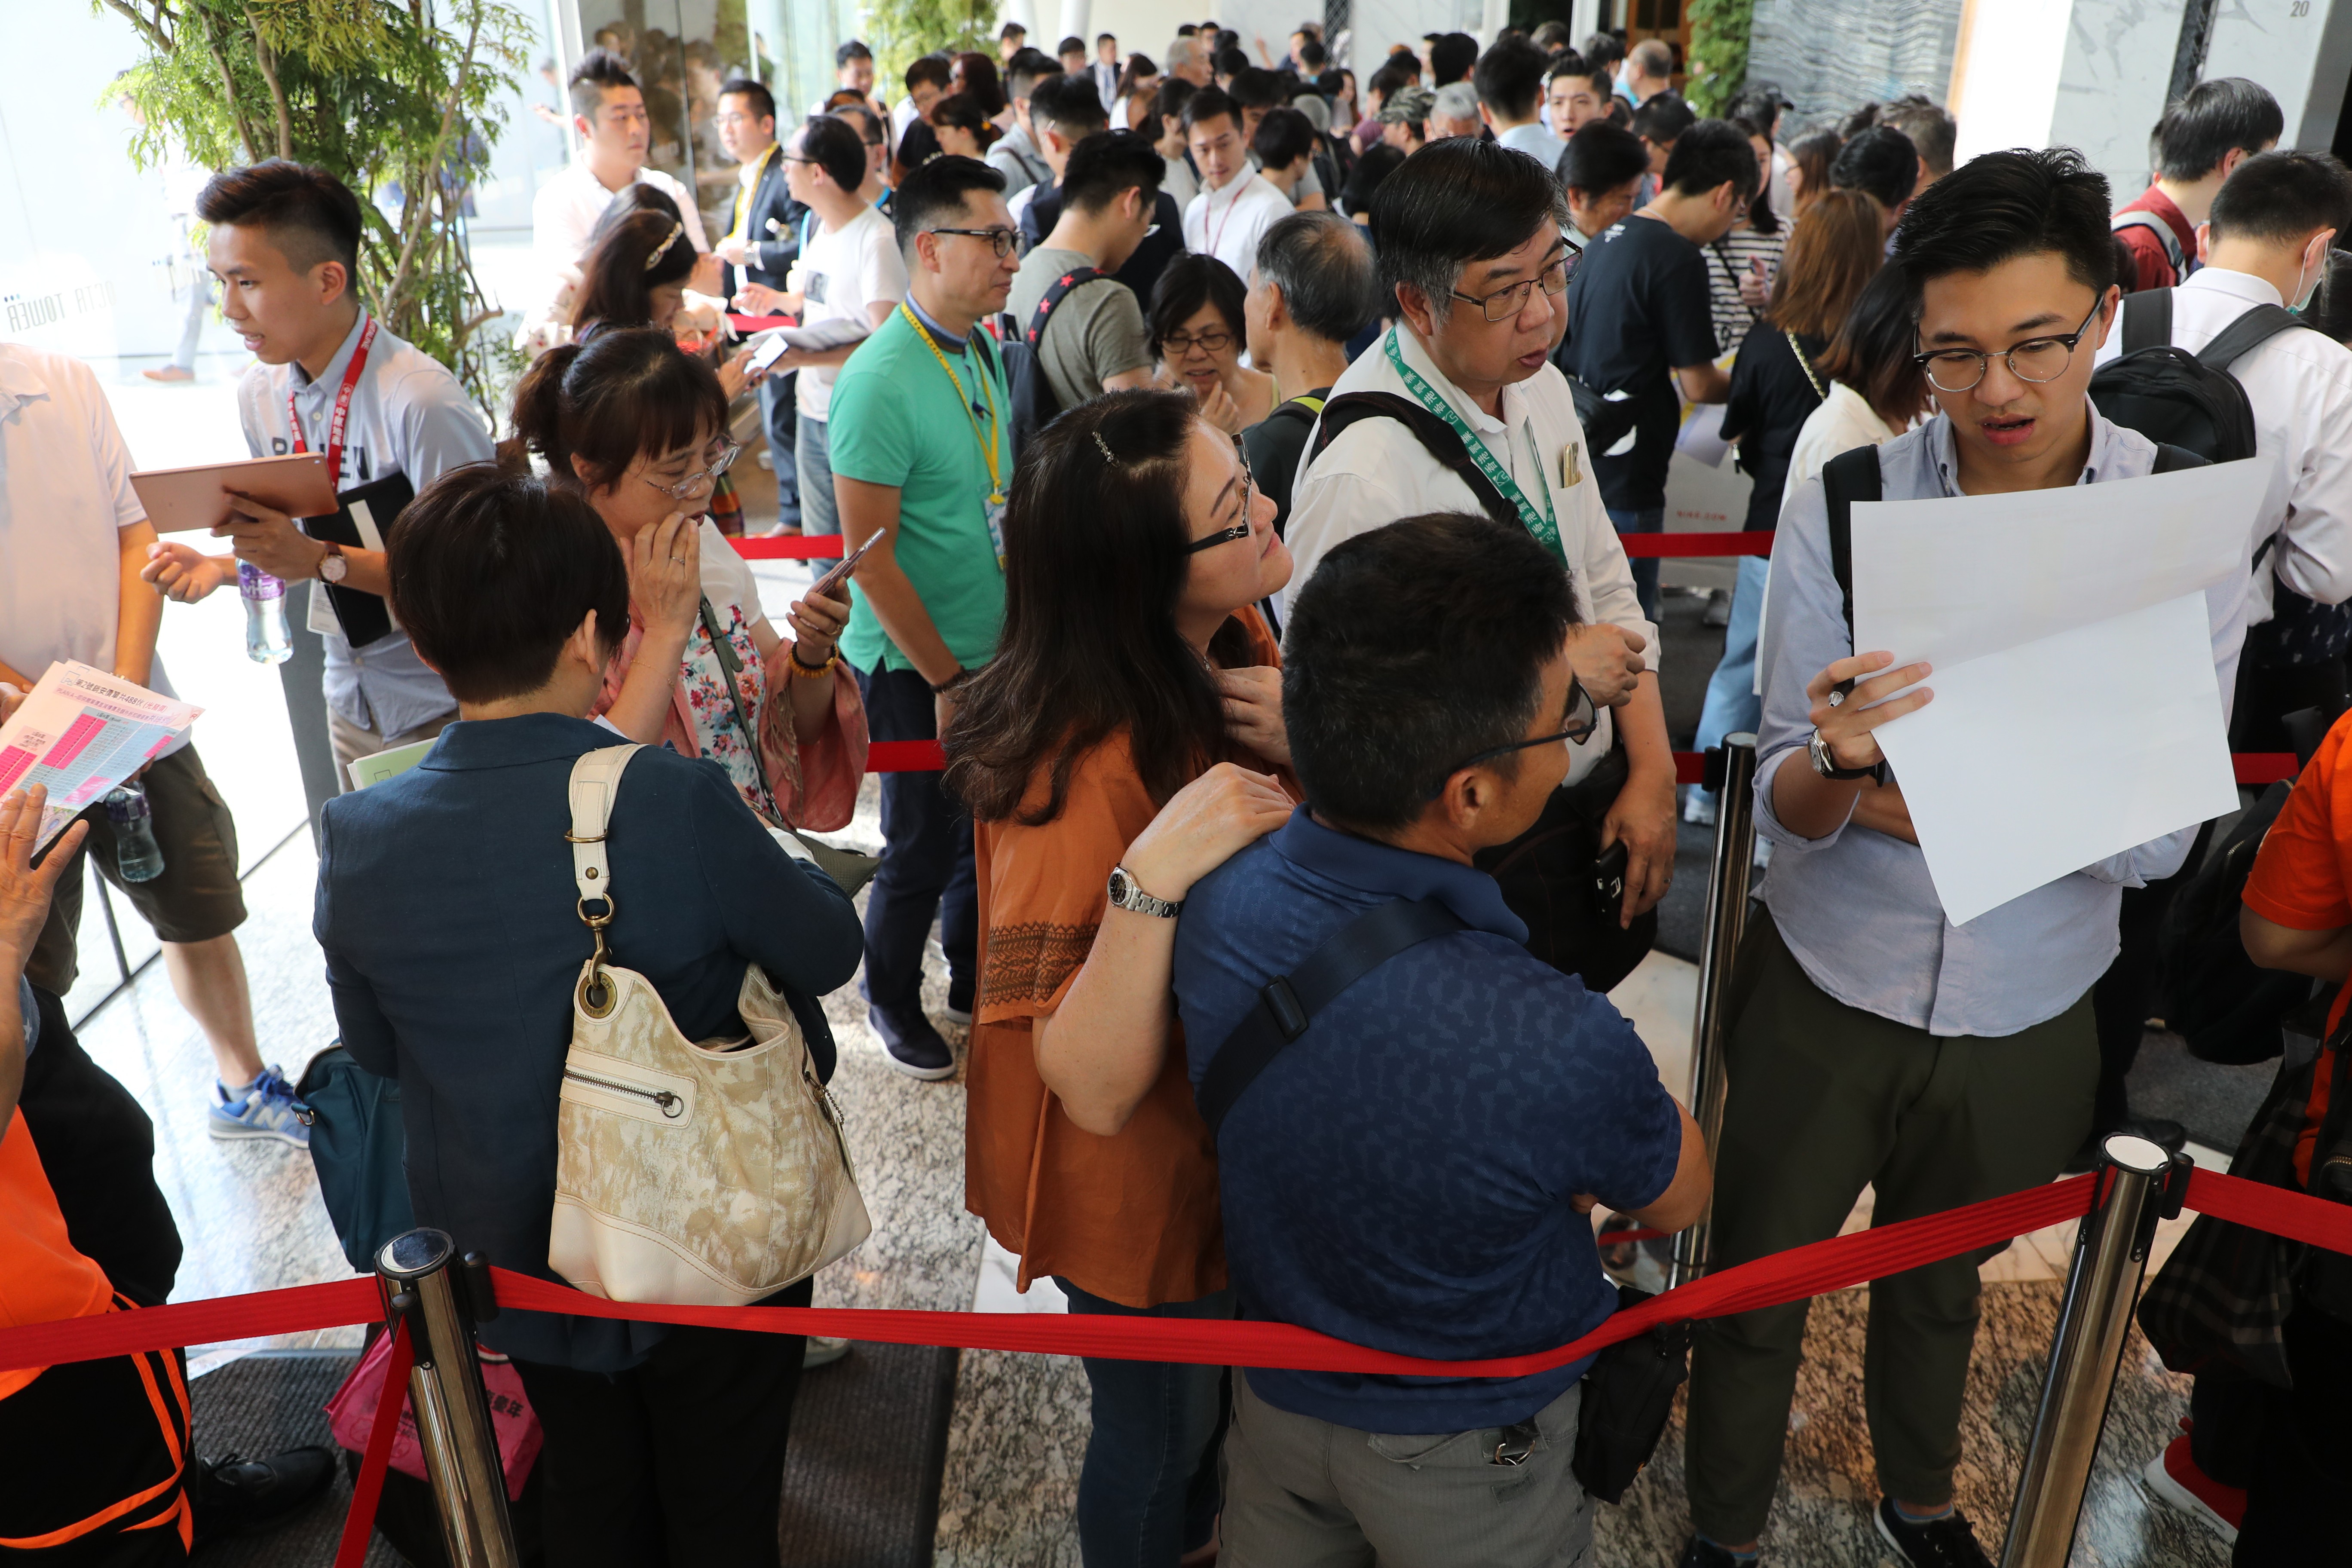 Thousands of potential buyers line up at the sales launch of Nan Fung Development’s LP6 development in Tseung Kwan O on 15 September 2018, during the calm before Super Typhoon Mangkhut made landfall in Hong Kong. Photo: SCMP/ Edward Wong